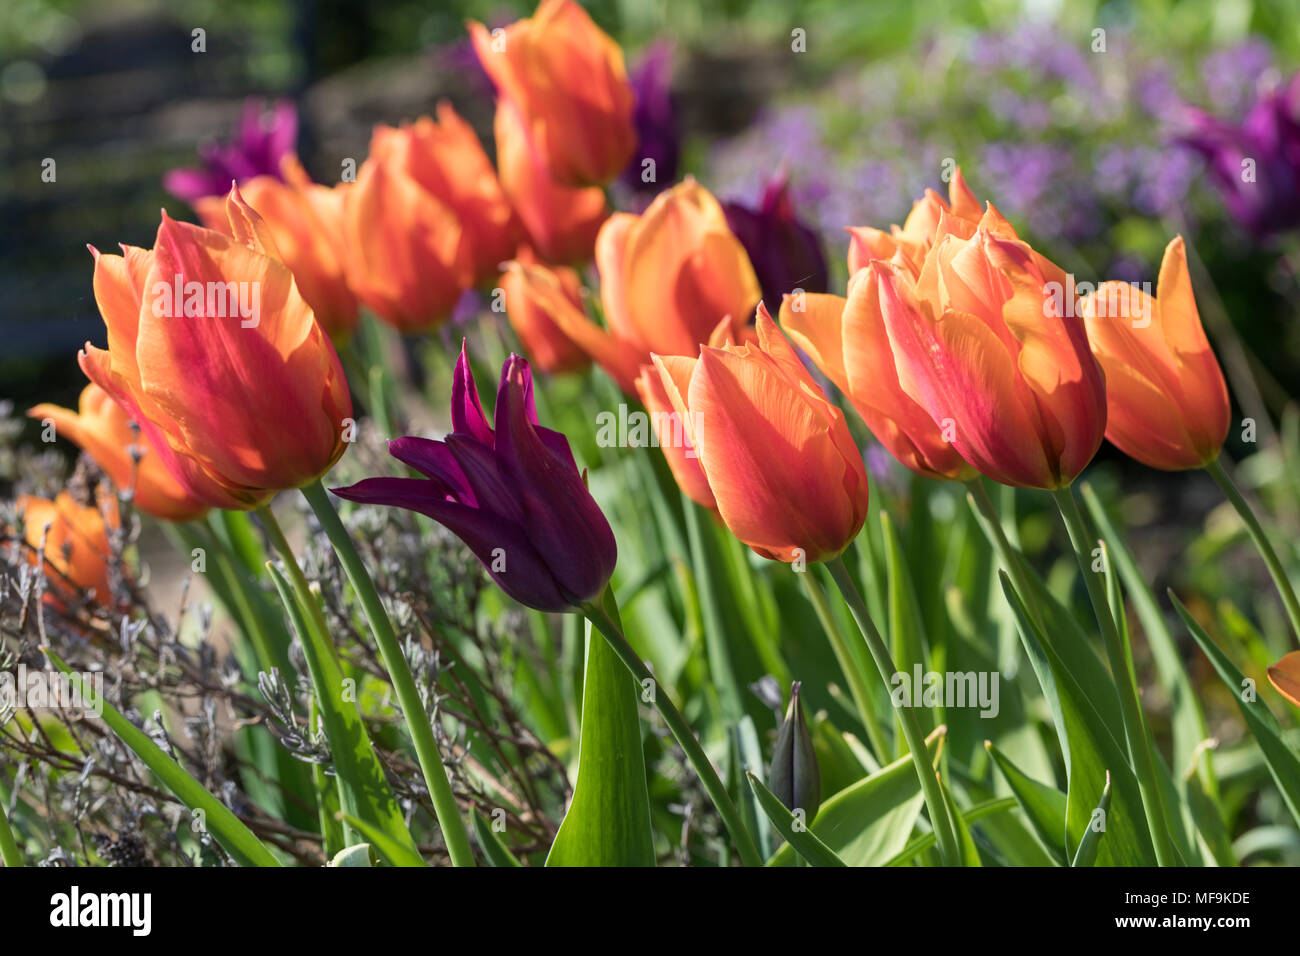 Tulipa Greetje Smit and Tulipa Burgundy flowering in a spring garden flower bed in the UK Stock Photo